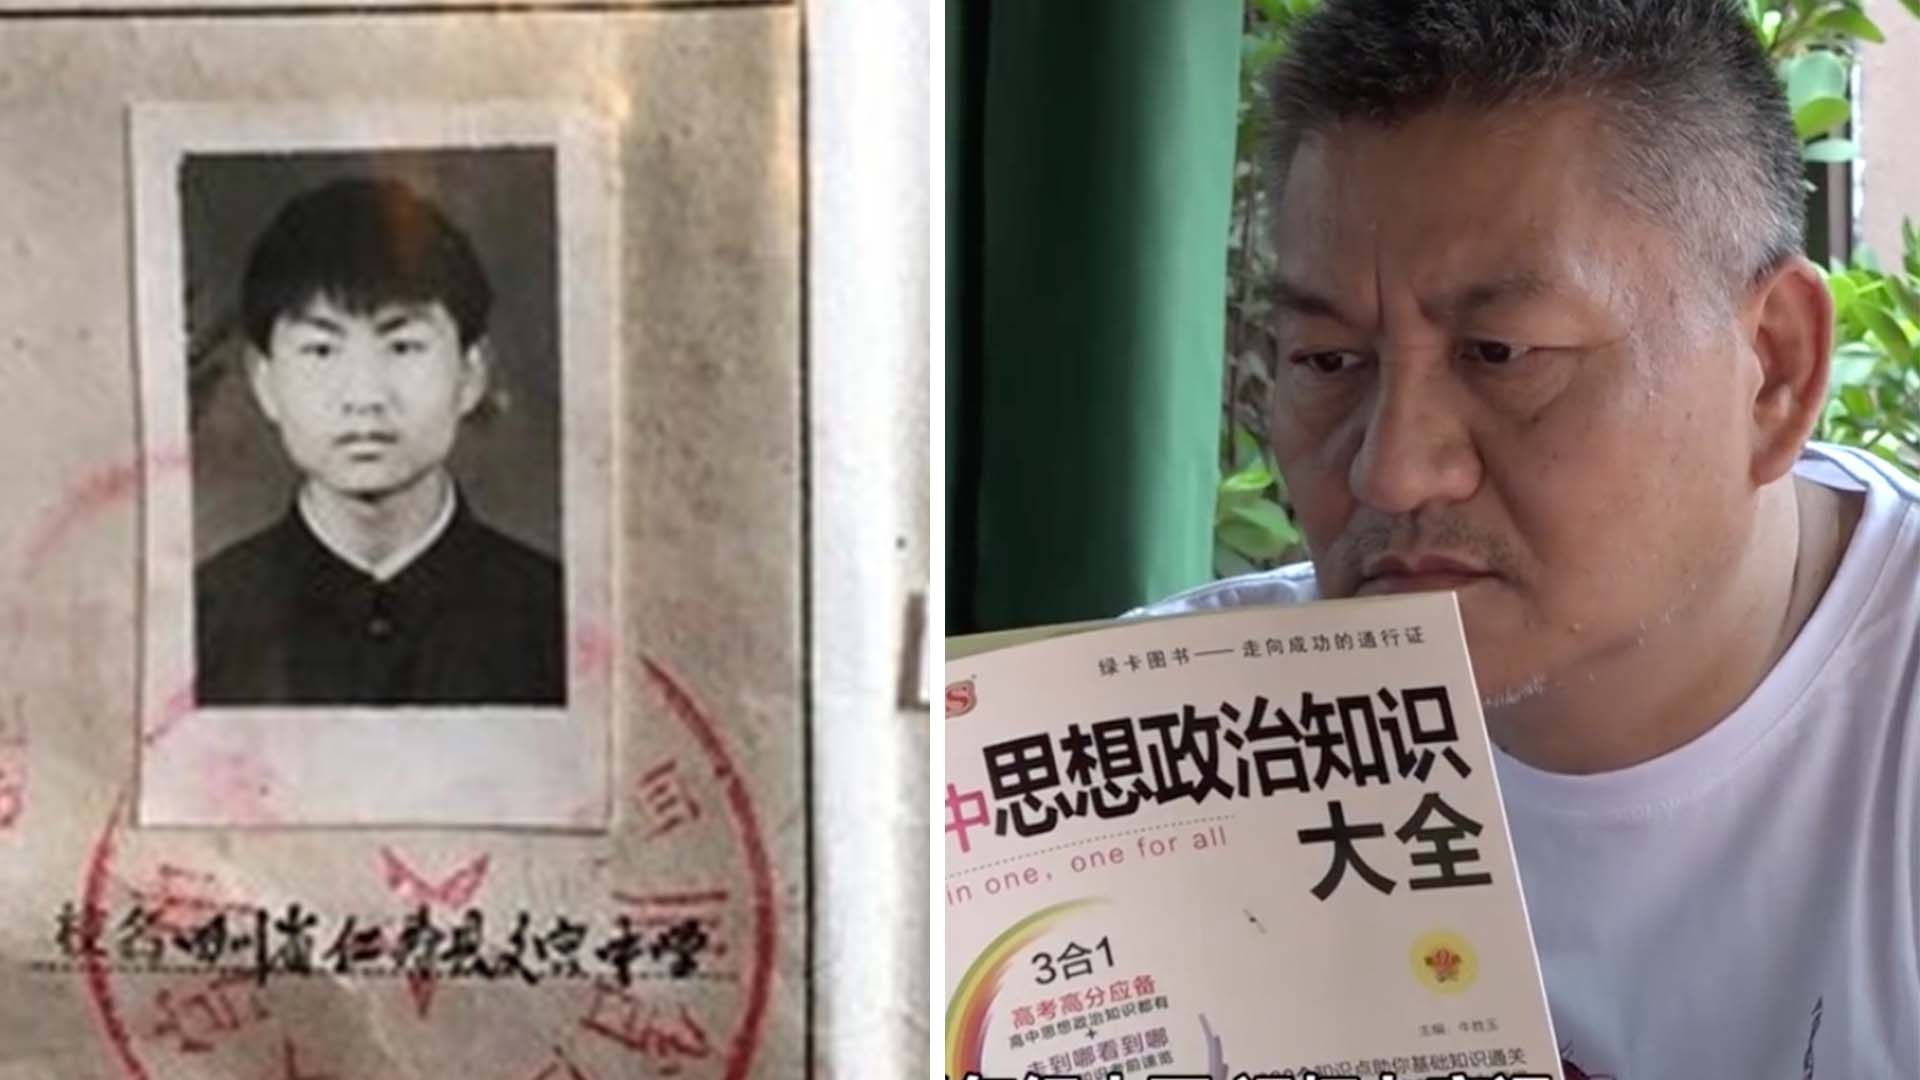 Liang Shi is 55-years-old and plans to take the gaokao for the 26th time. Photo: SCMP composite